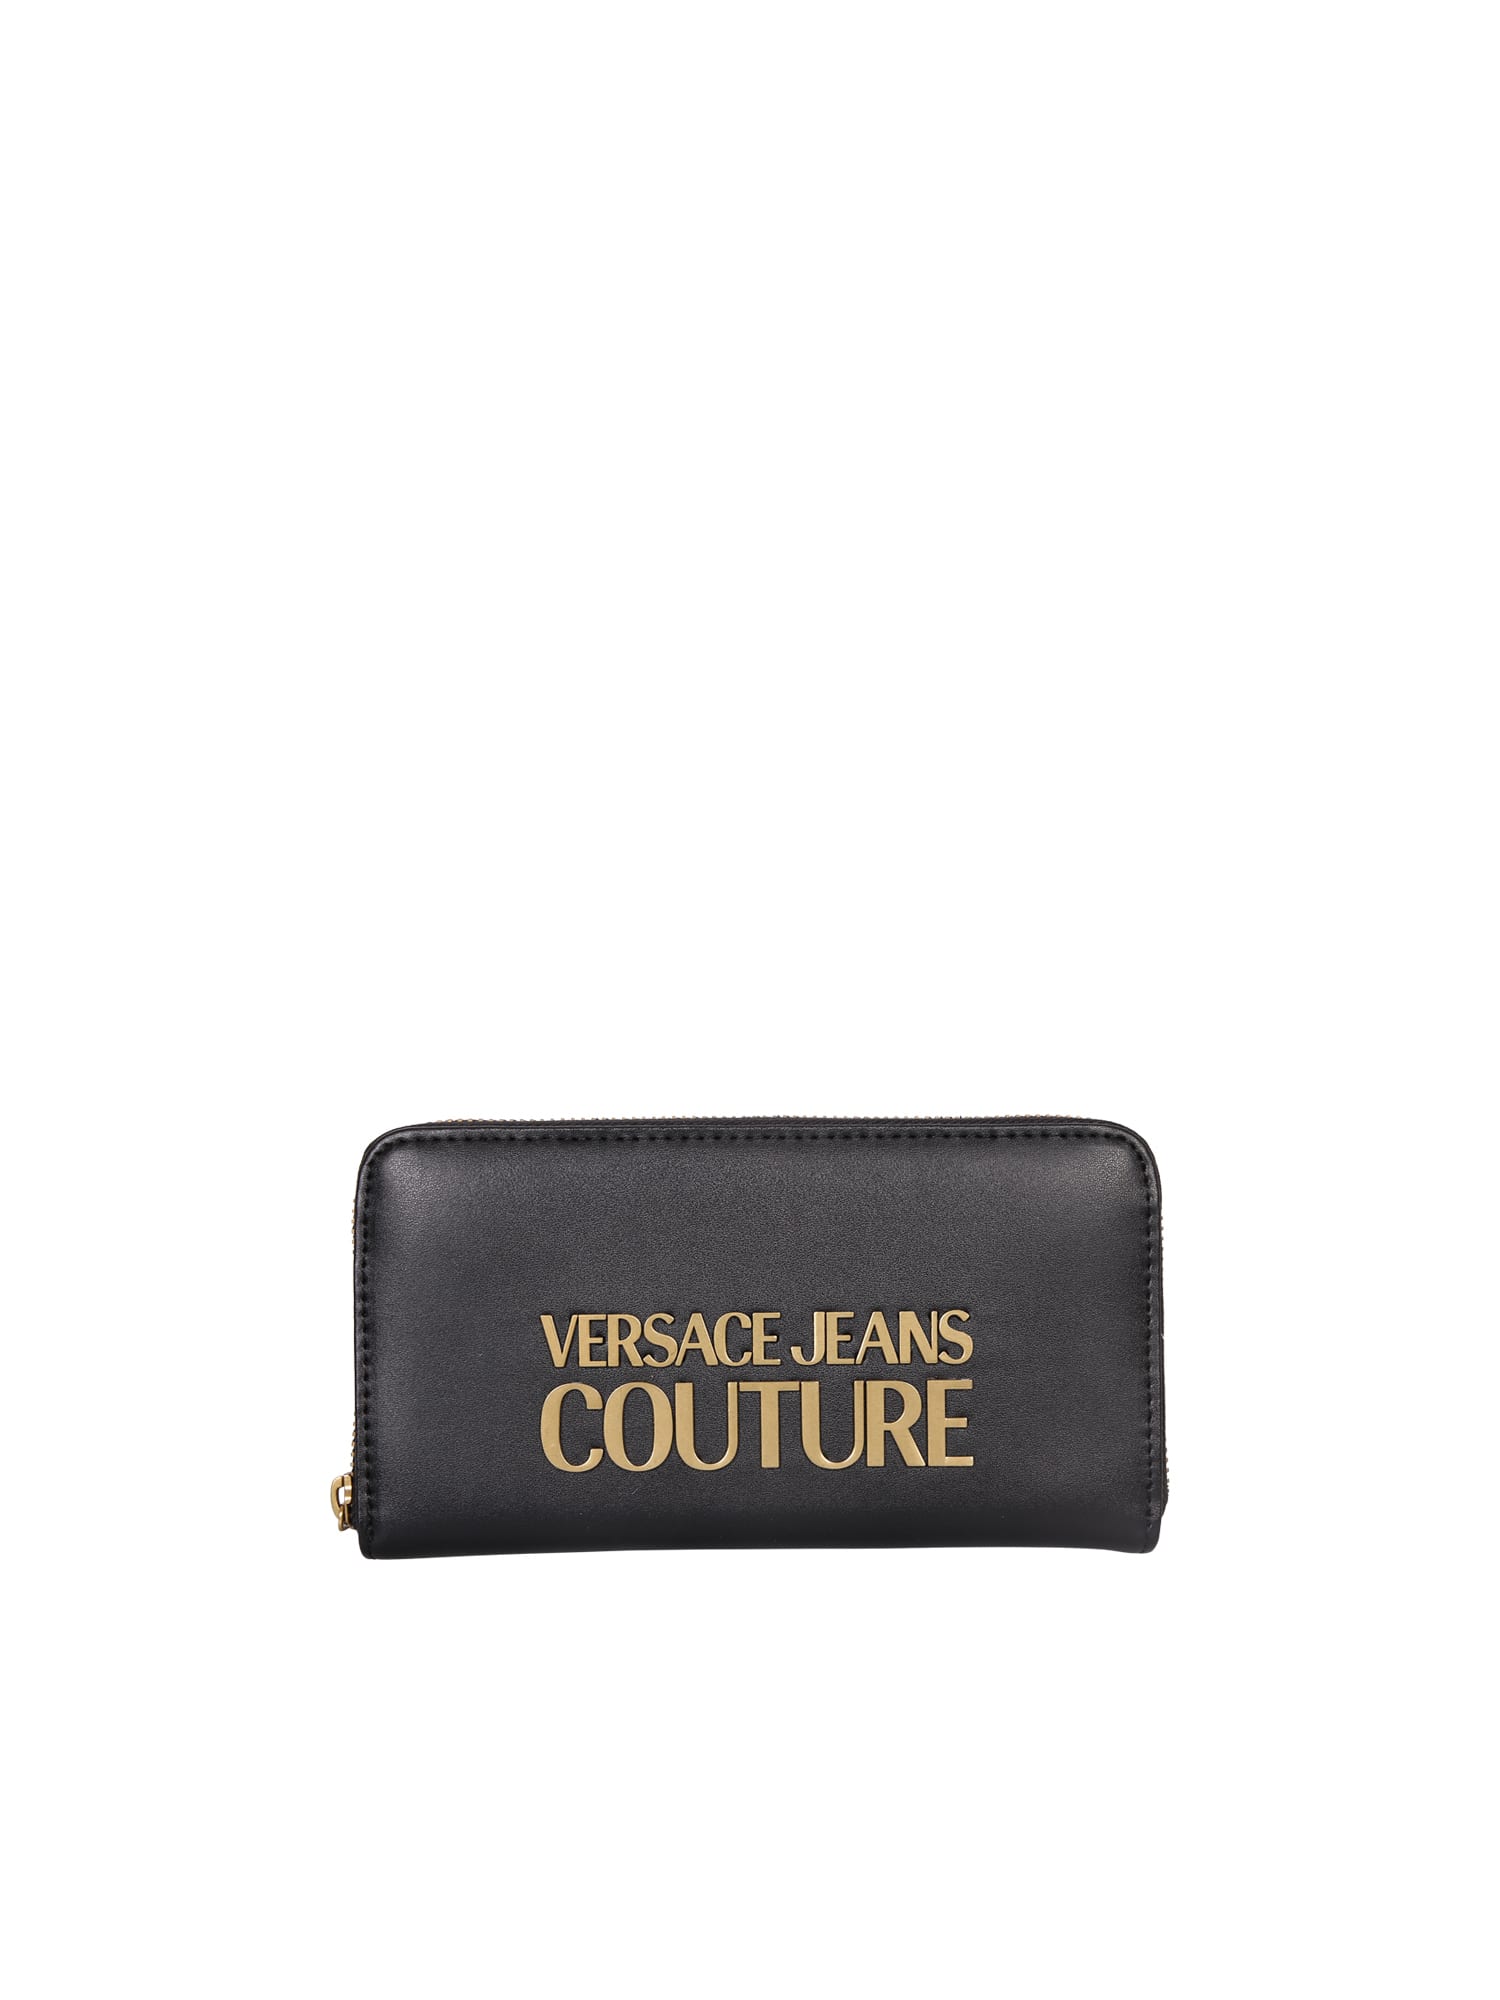 Versace Jeans Couture Foulard Wallet